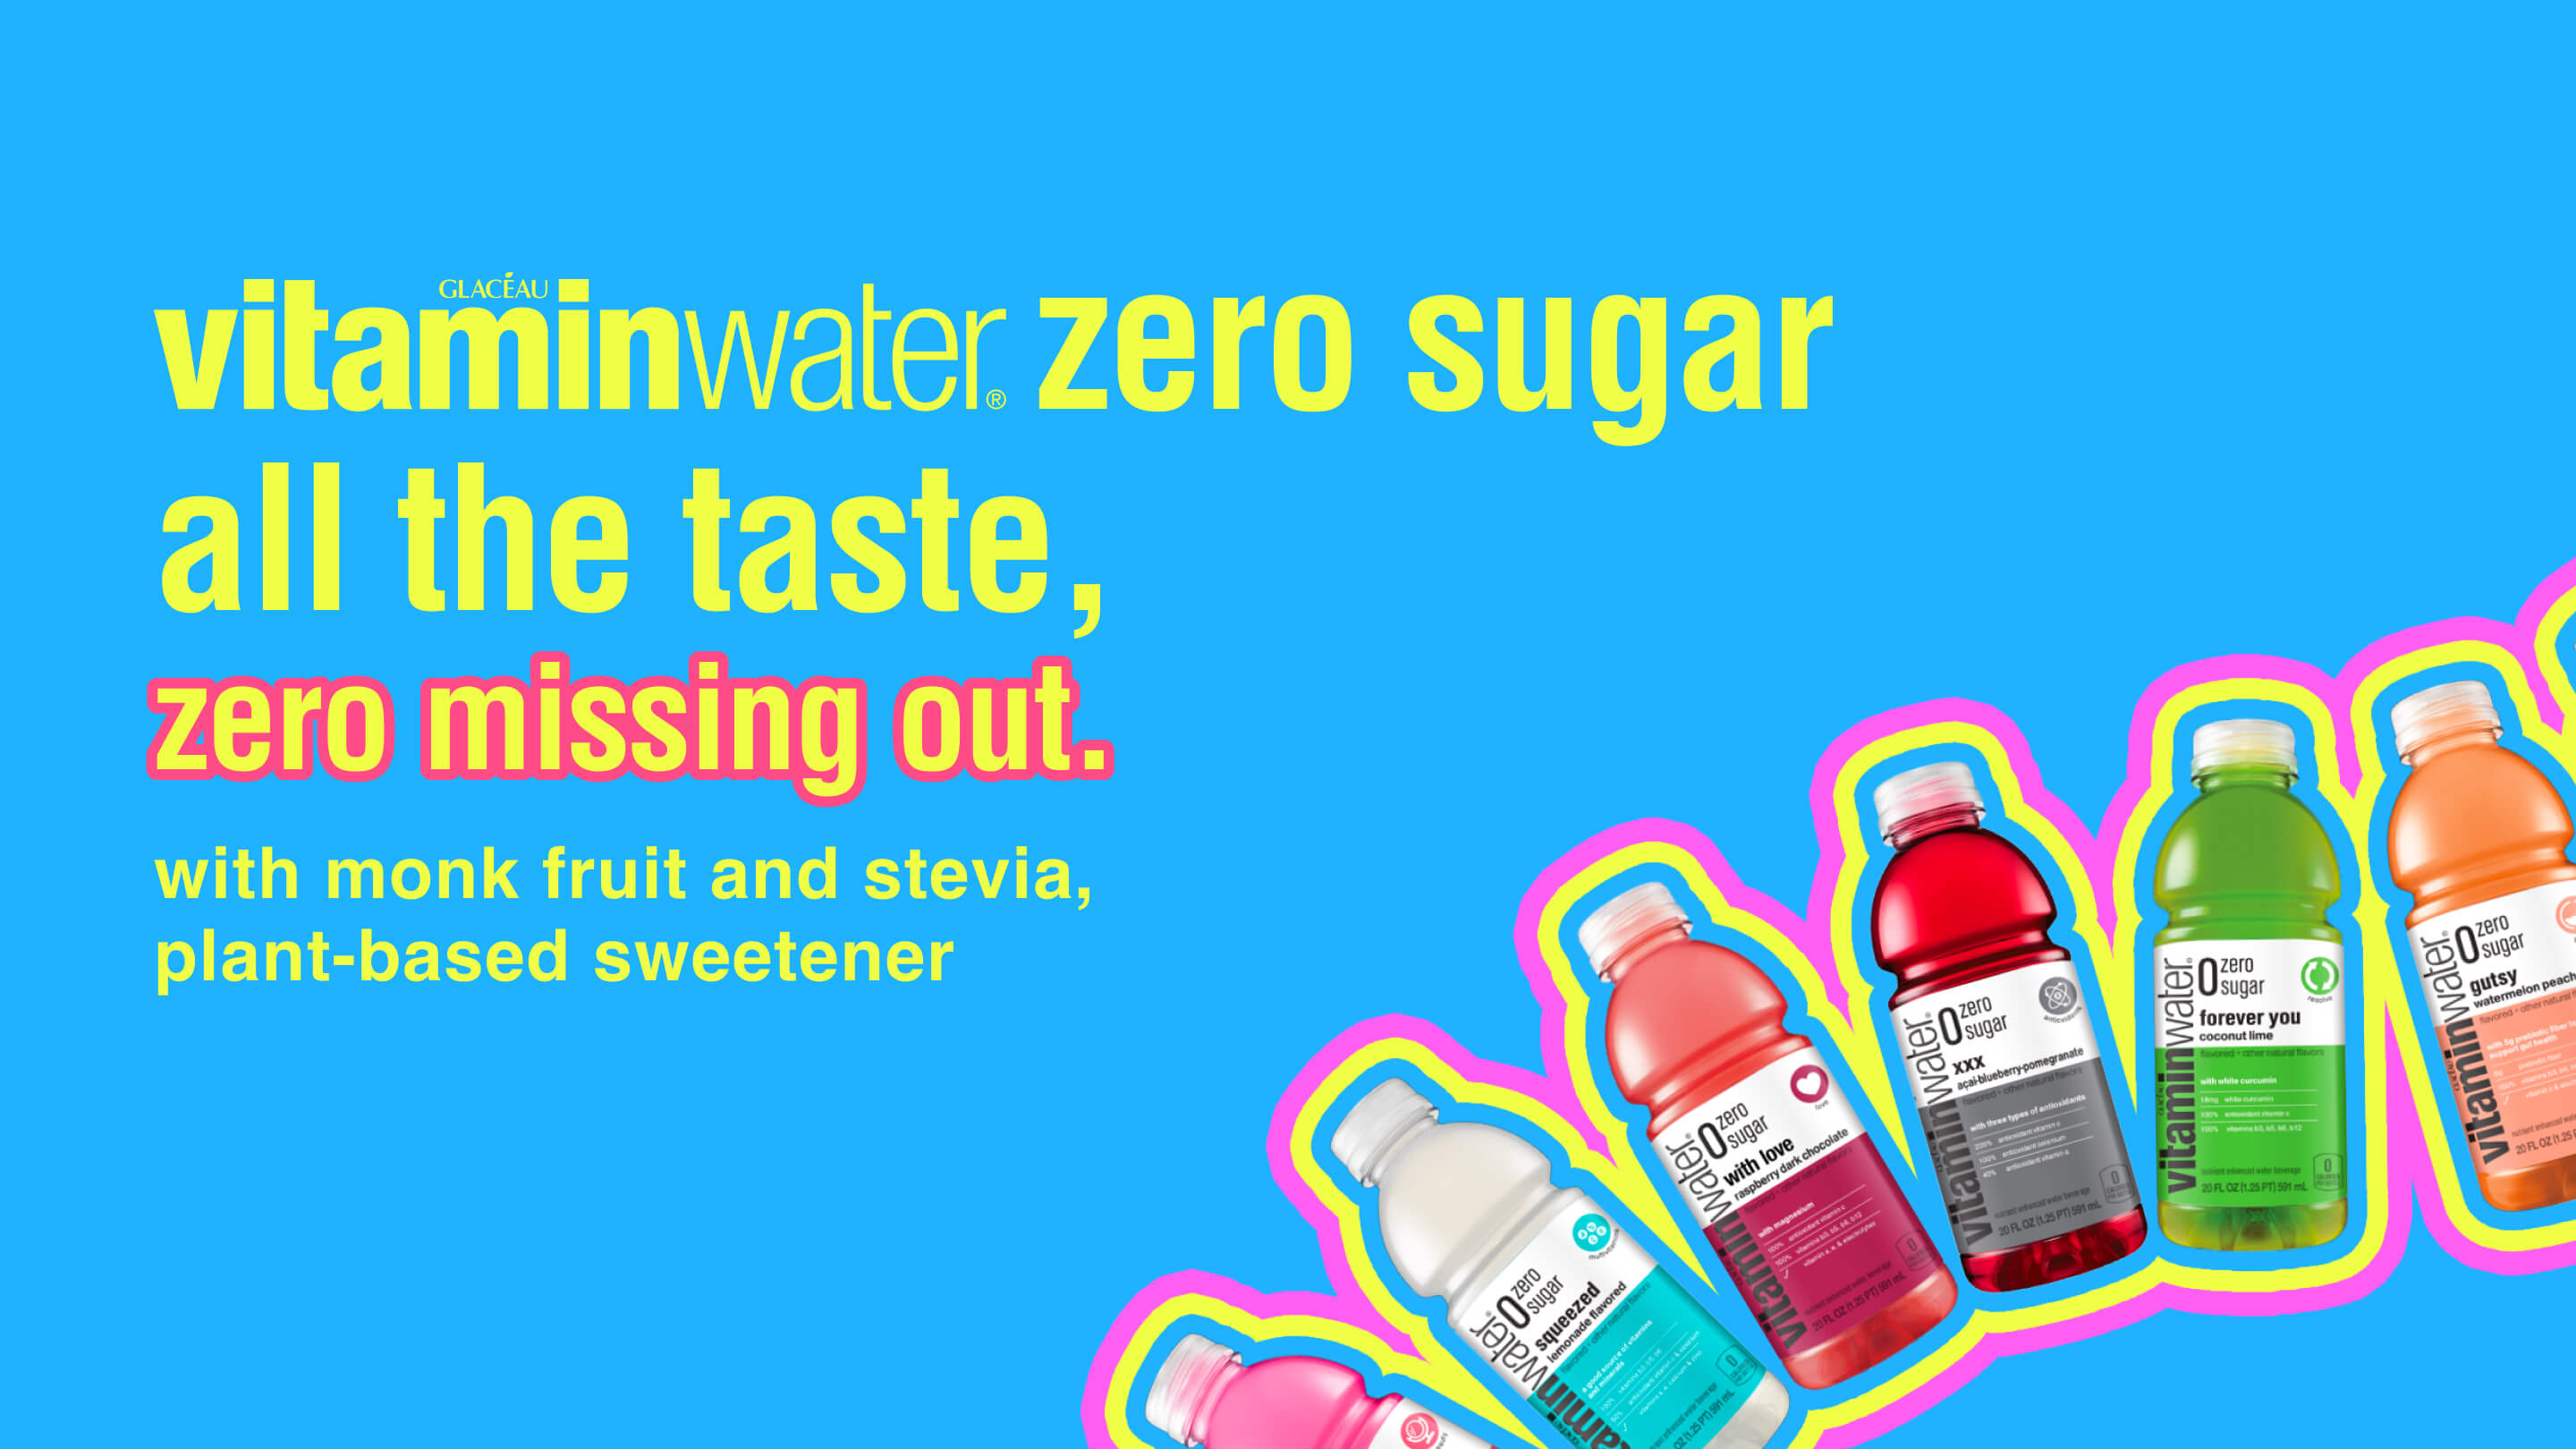 VitaminWater Zero all the taste, zero missing out. now with monk fruit and stevia, plant-based sweetener